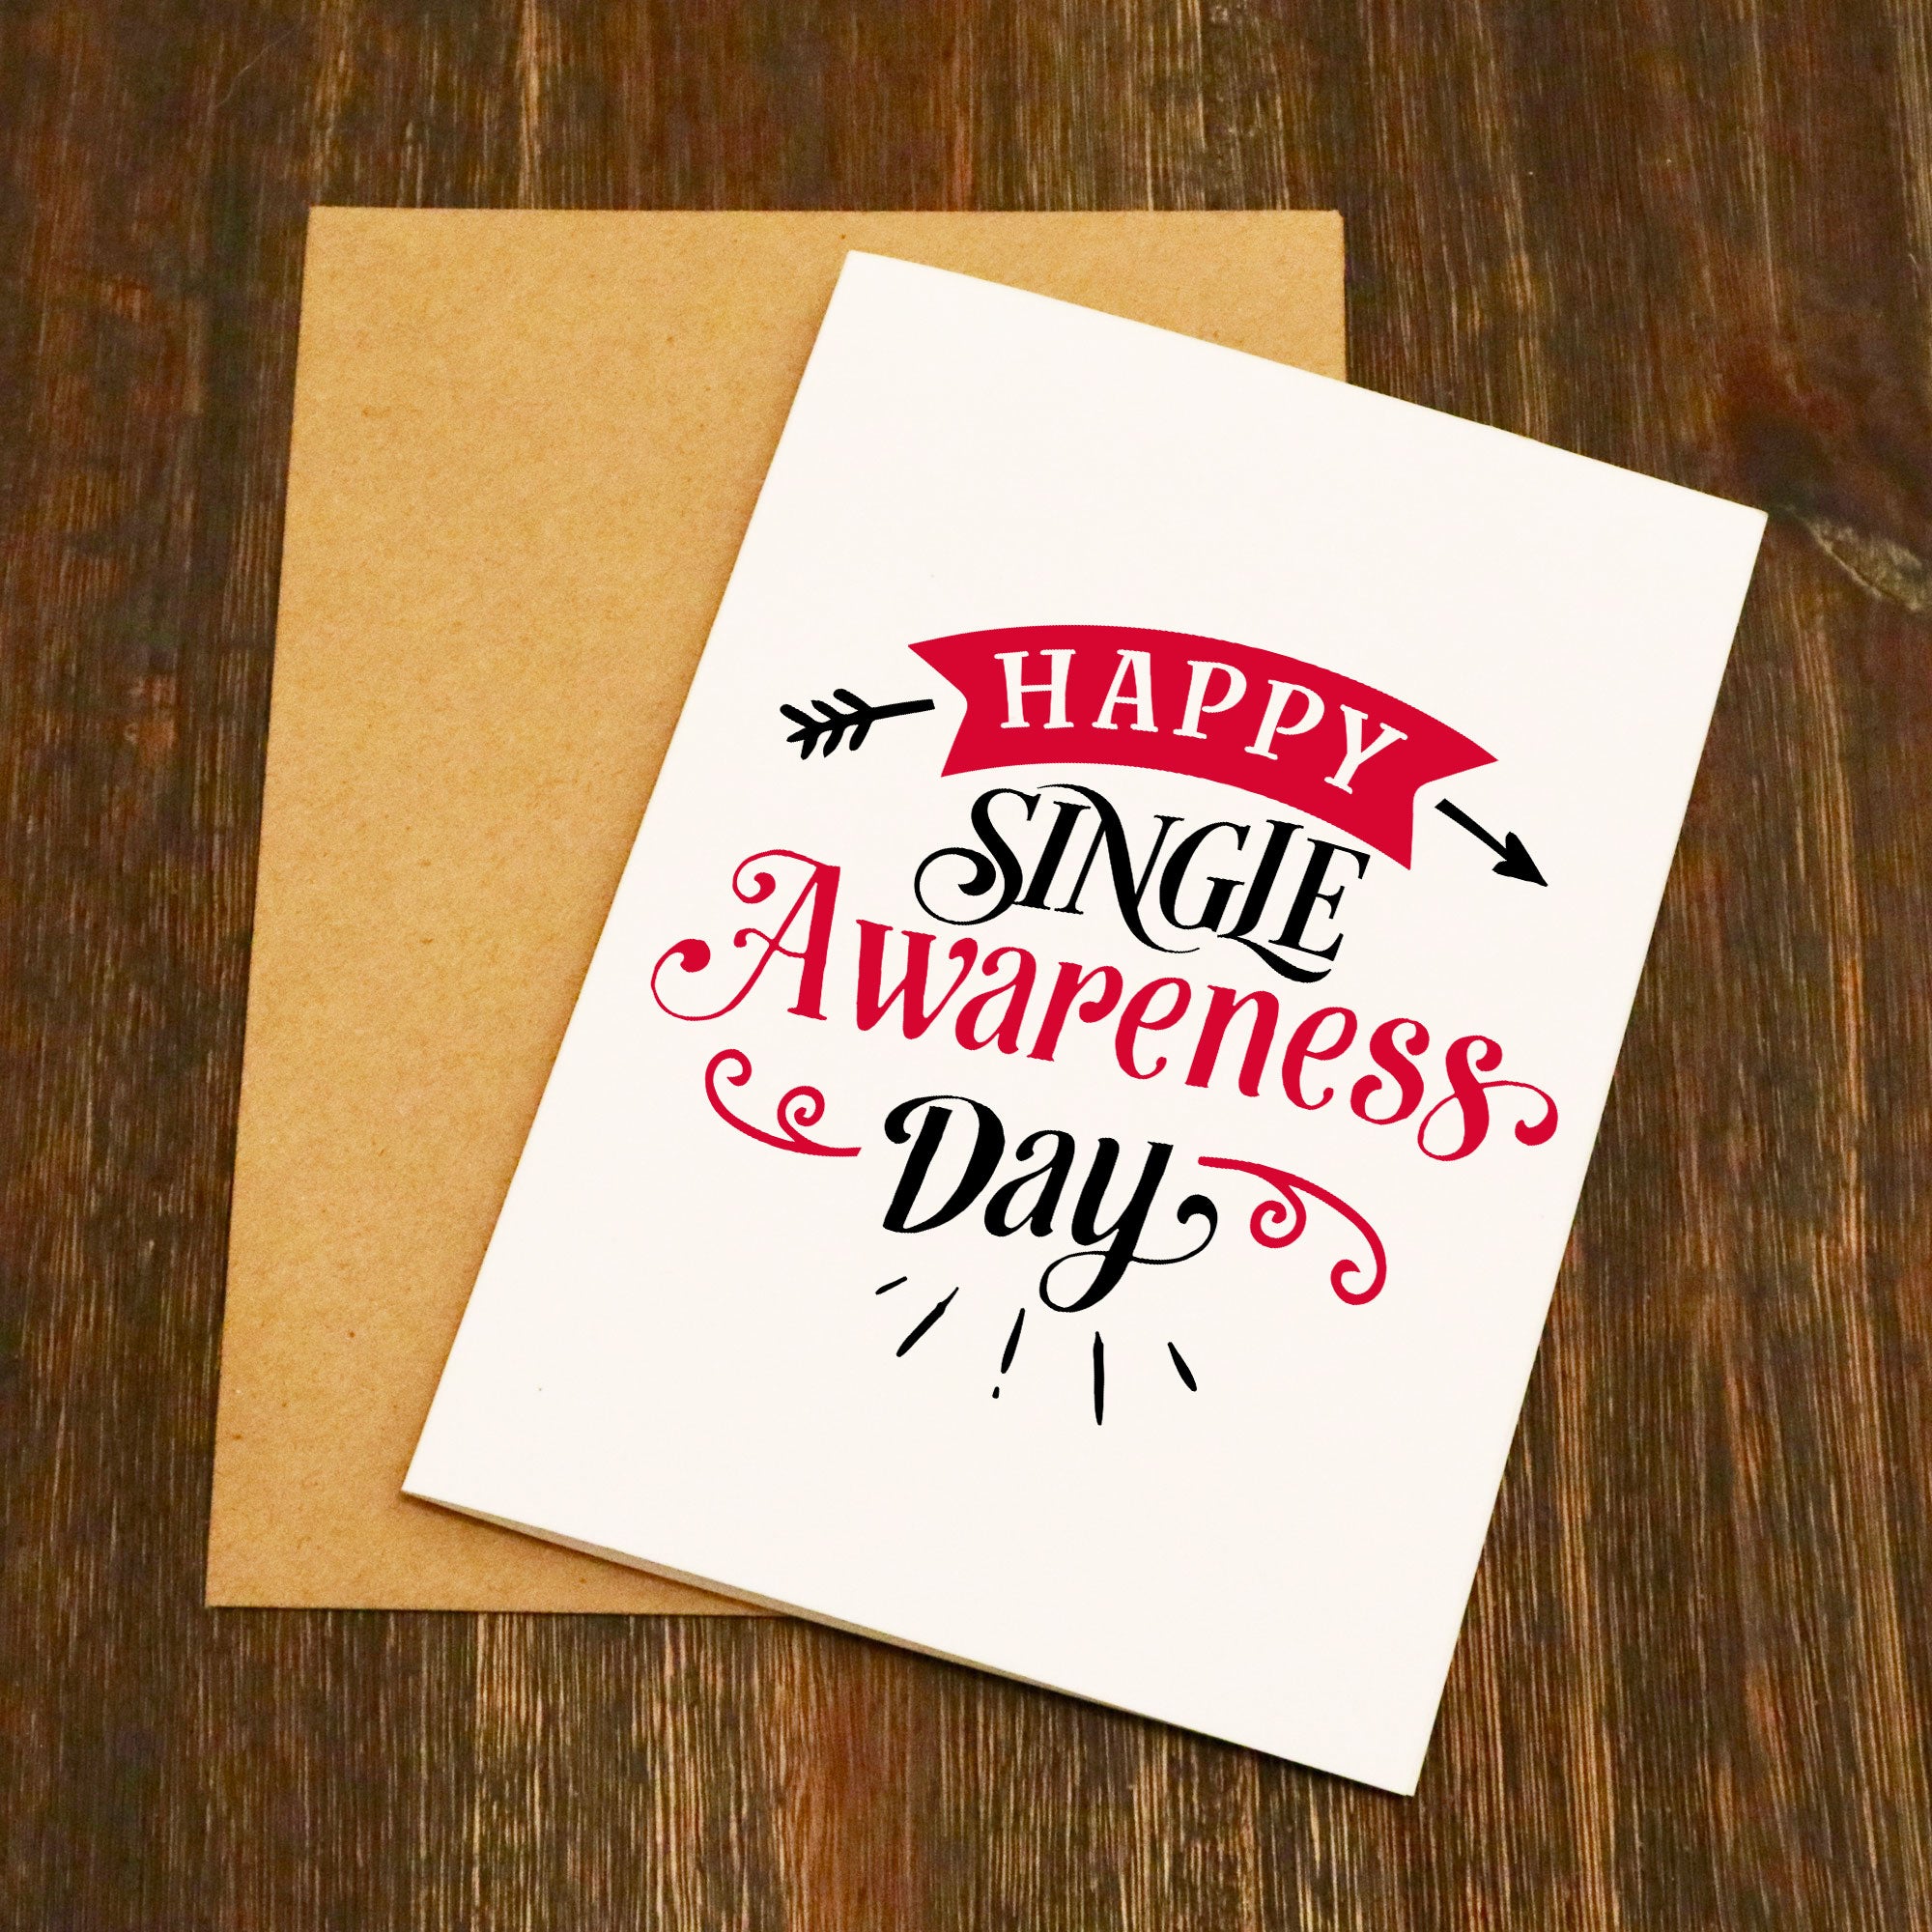 Happy Single Awareness Day Funny Valentine's Card